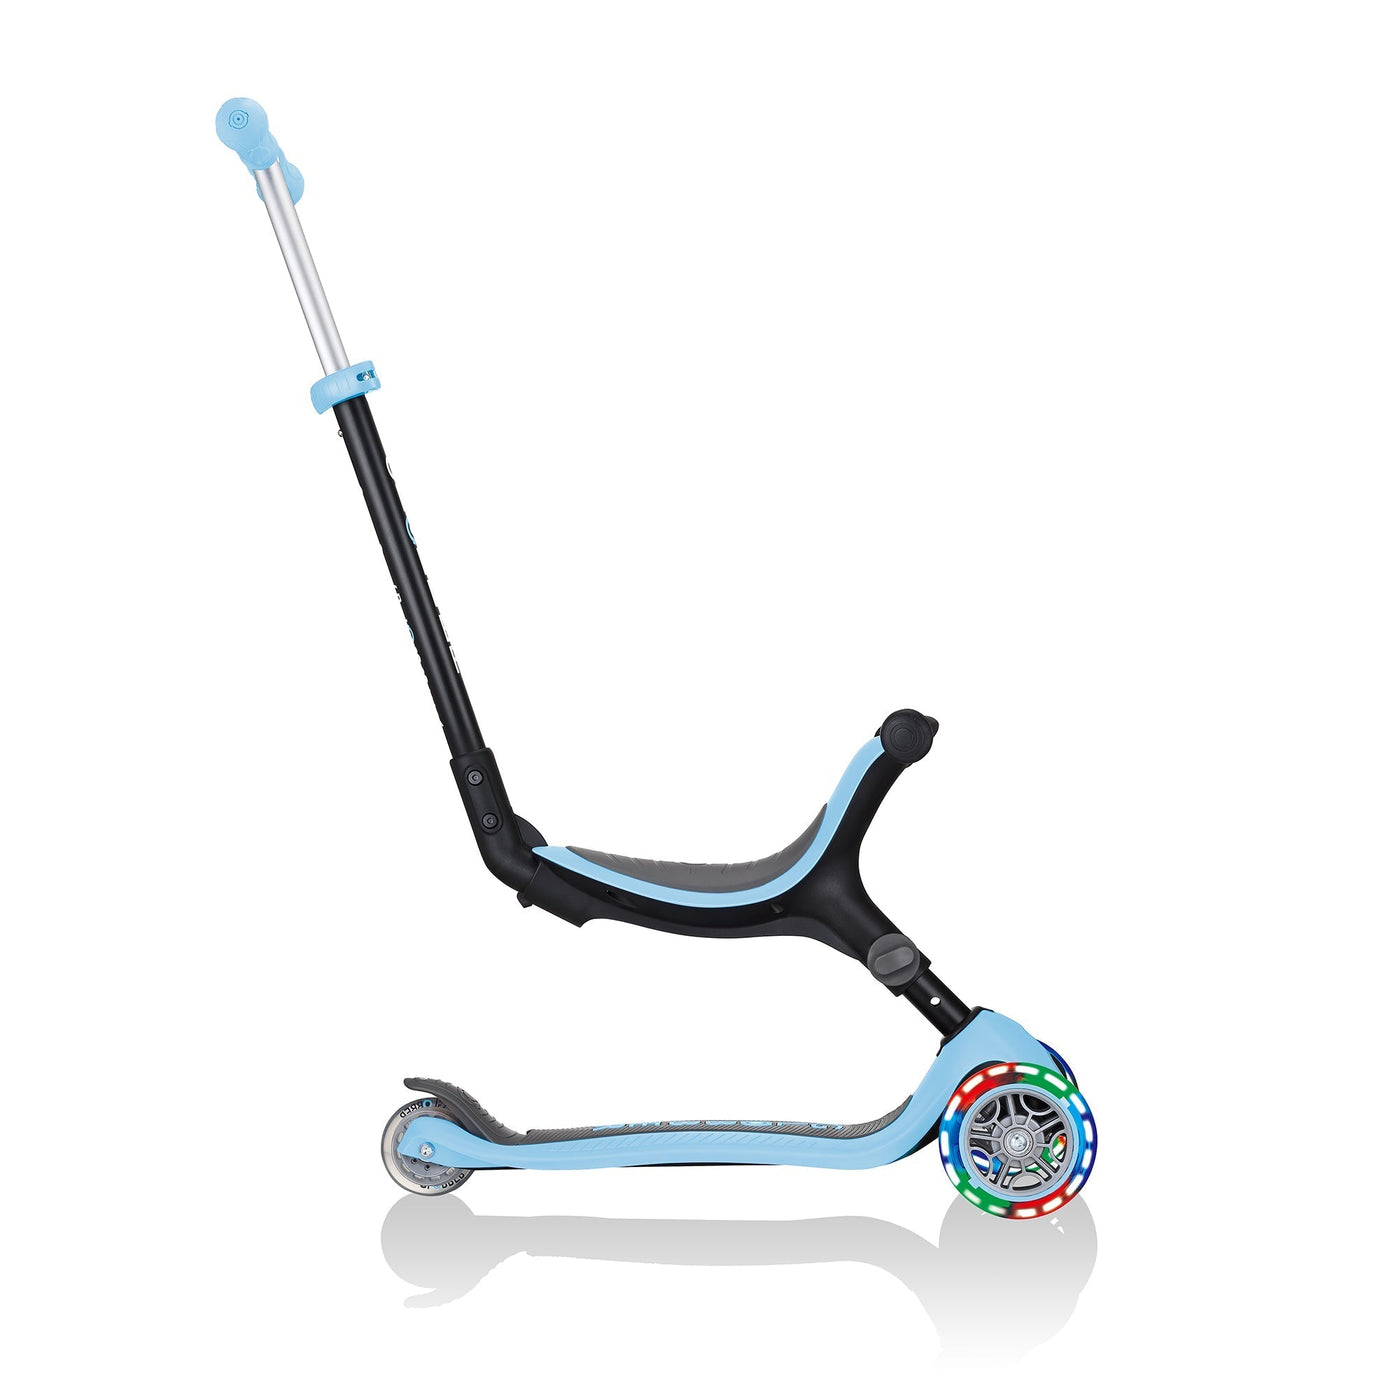 Go Up Foldable Lights 3-in-1 Scooter with 3 Wheels